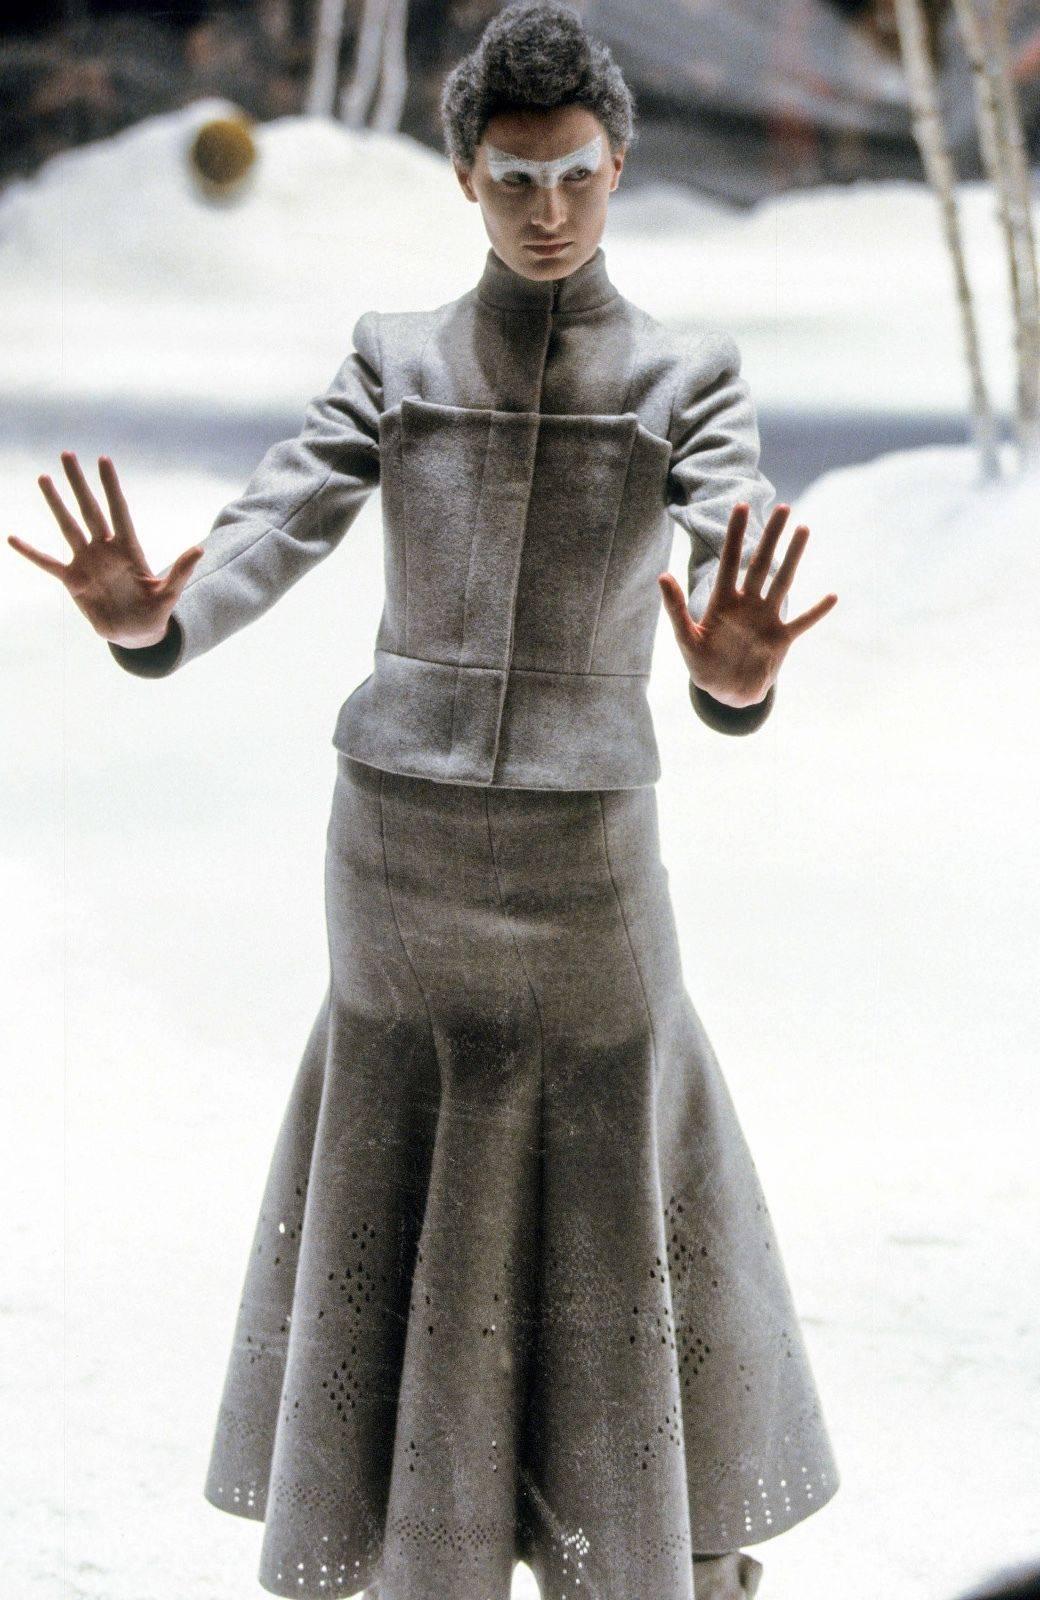 Alexander McQueen Vintage 1999 Grey Coat It 42 Uk 10
Rare piece from the fall 1999 collection 
Grey with slight metallic finish 
Pleated detail to the front 
Fully lined, with concealed button fastening
Length 38 inches, sleeve 23 inches, chest 19